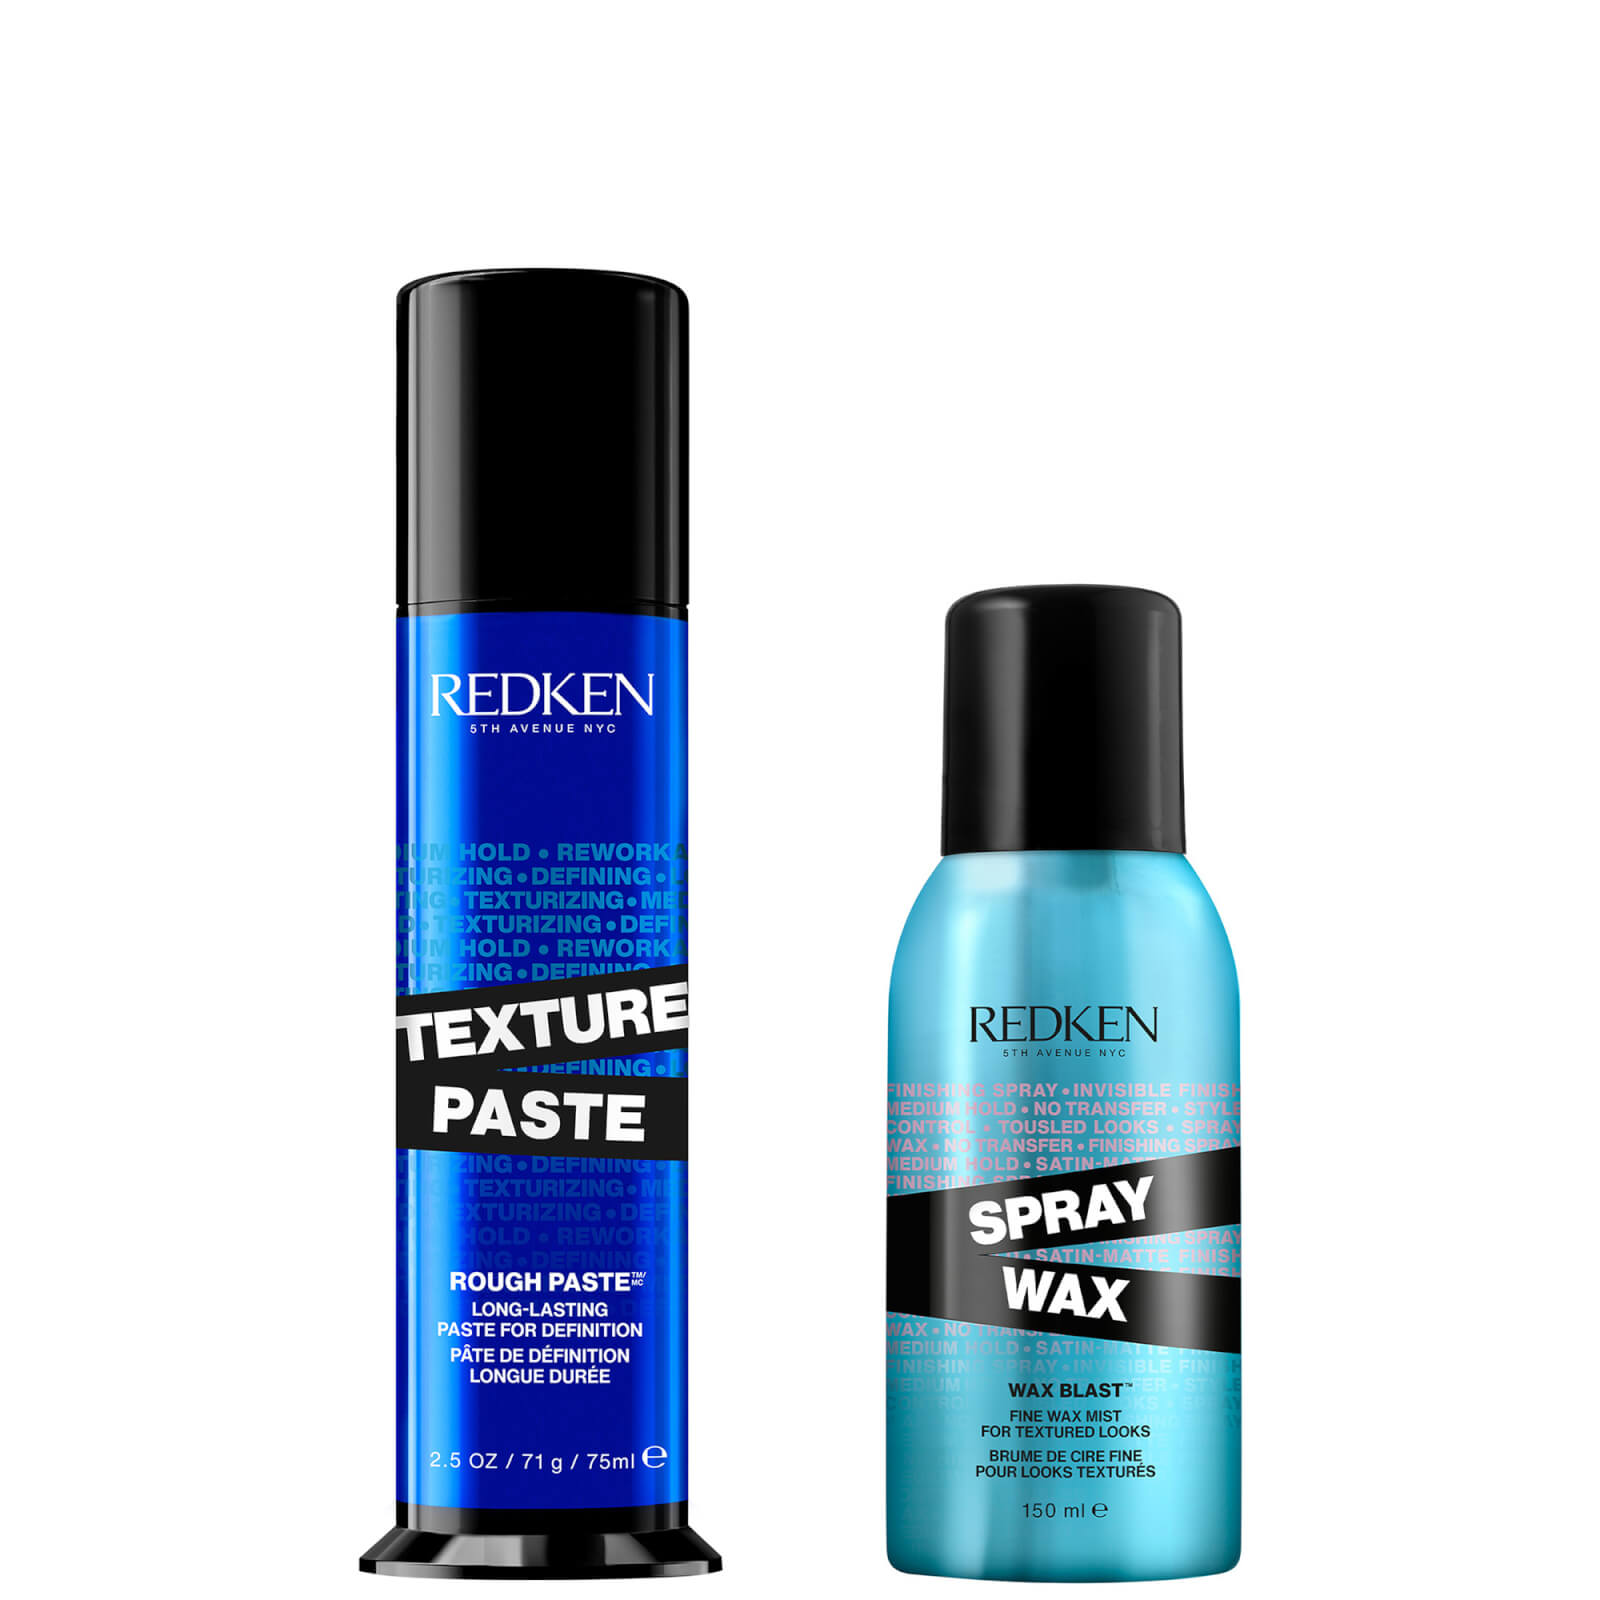 Image of Redken Styling Texture Paste and Spray Wax Bundle